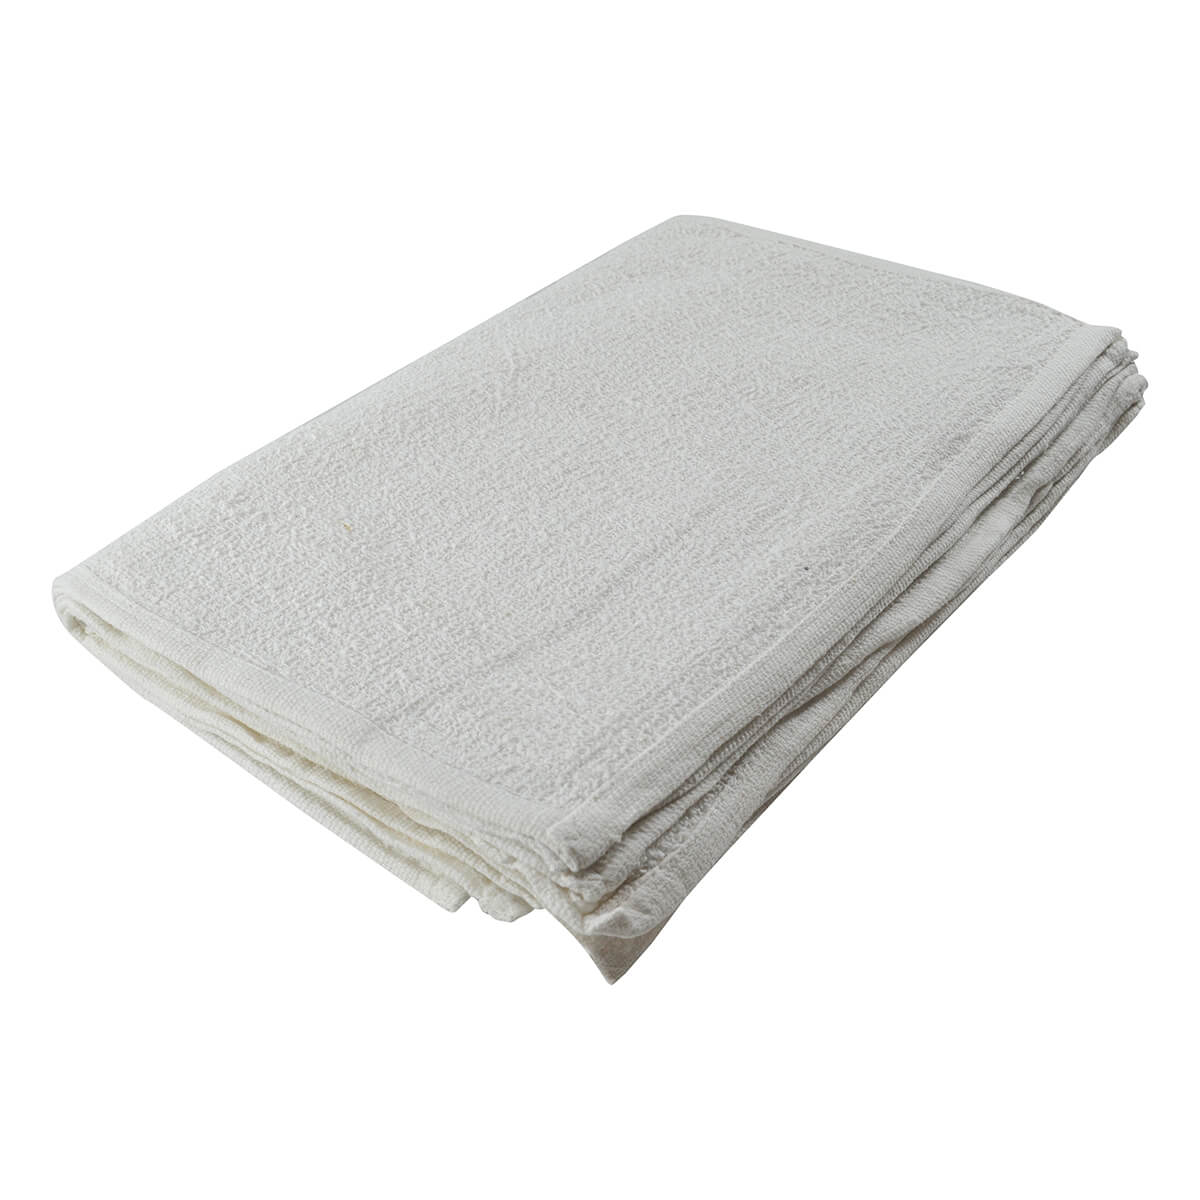 White Terry Towels - 16-in x 19-in - 10 pack